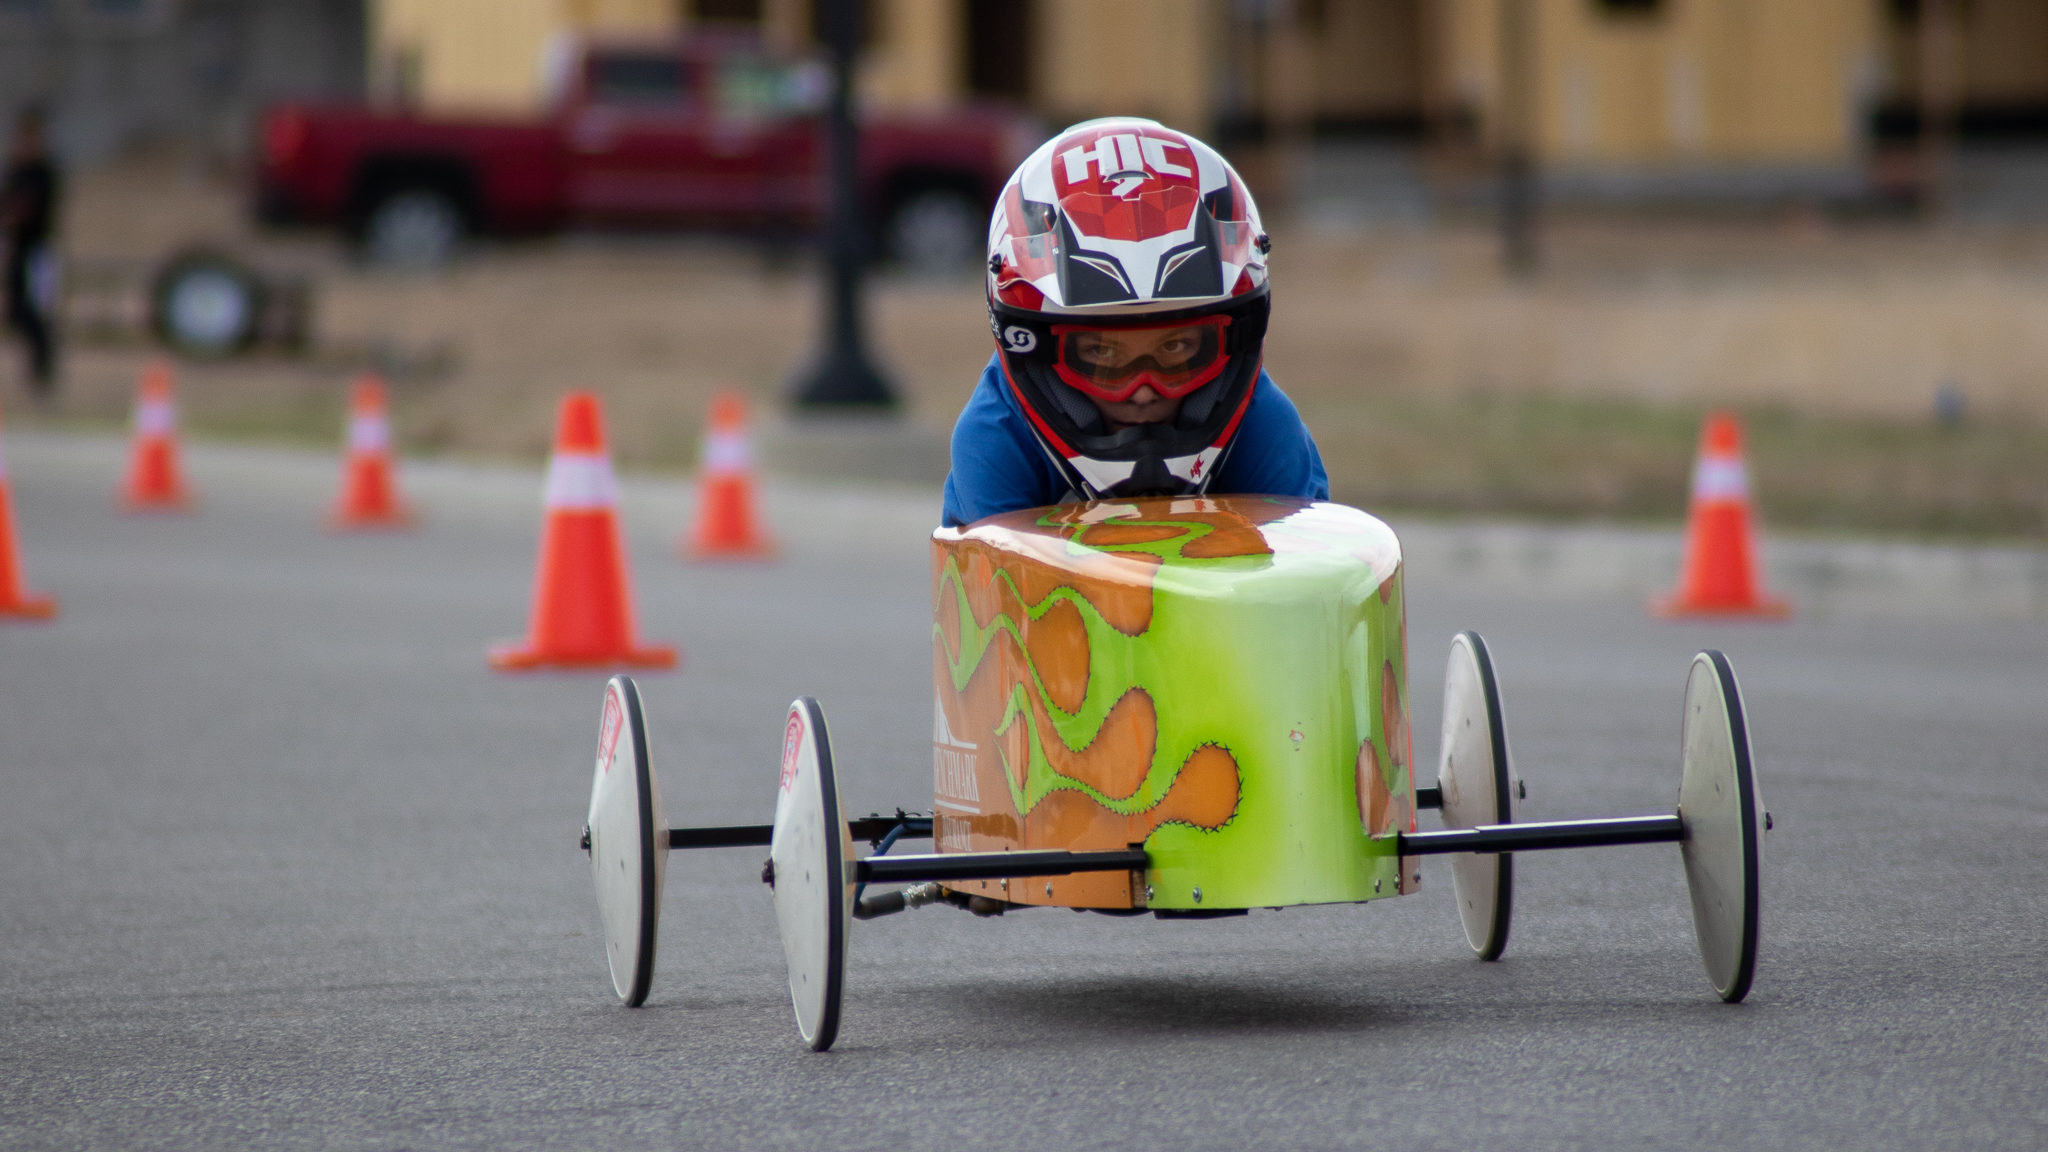 Daybreak will hold its second annual Soap Box Derby on Saturday, April 23.
Photo credit: Daybreak...